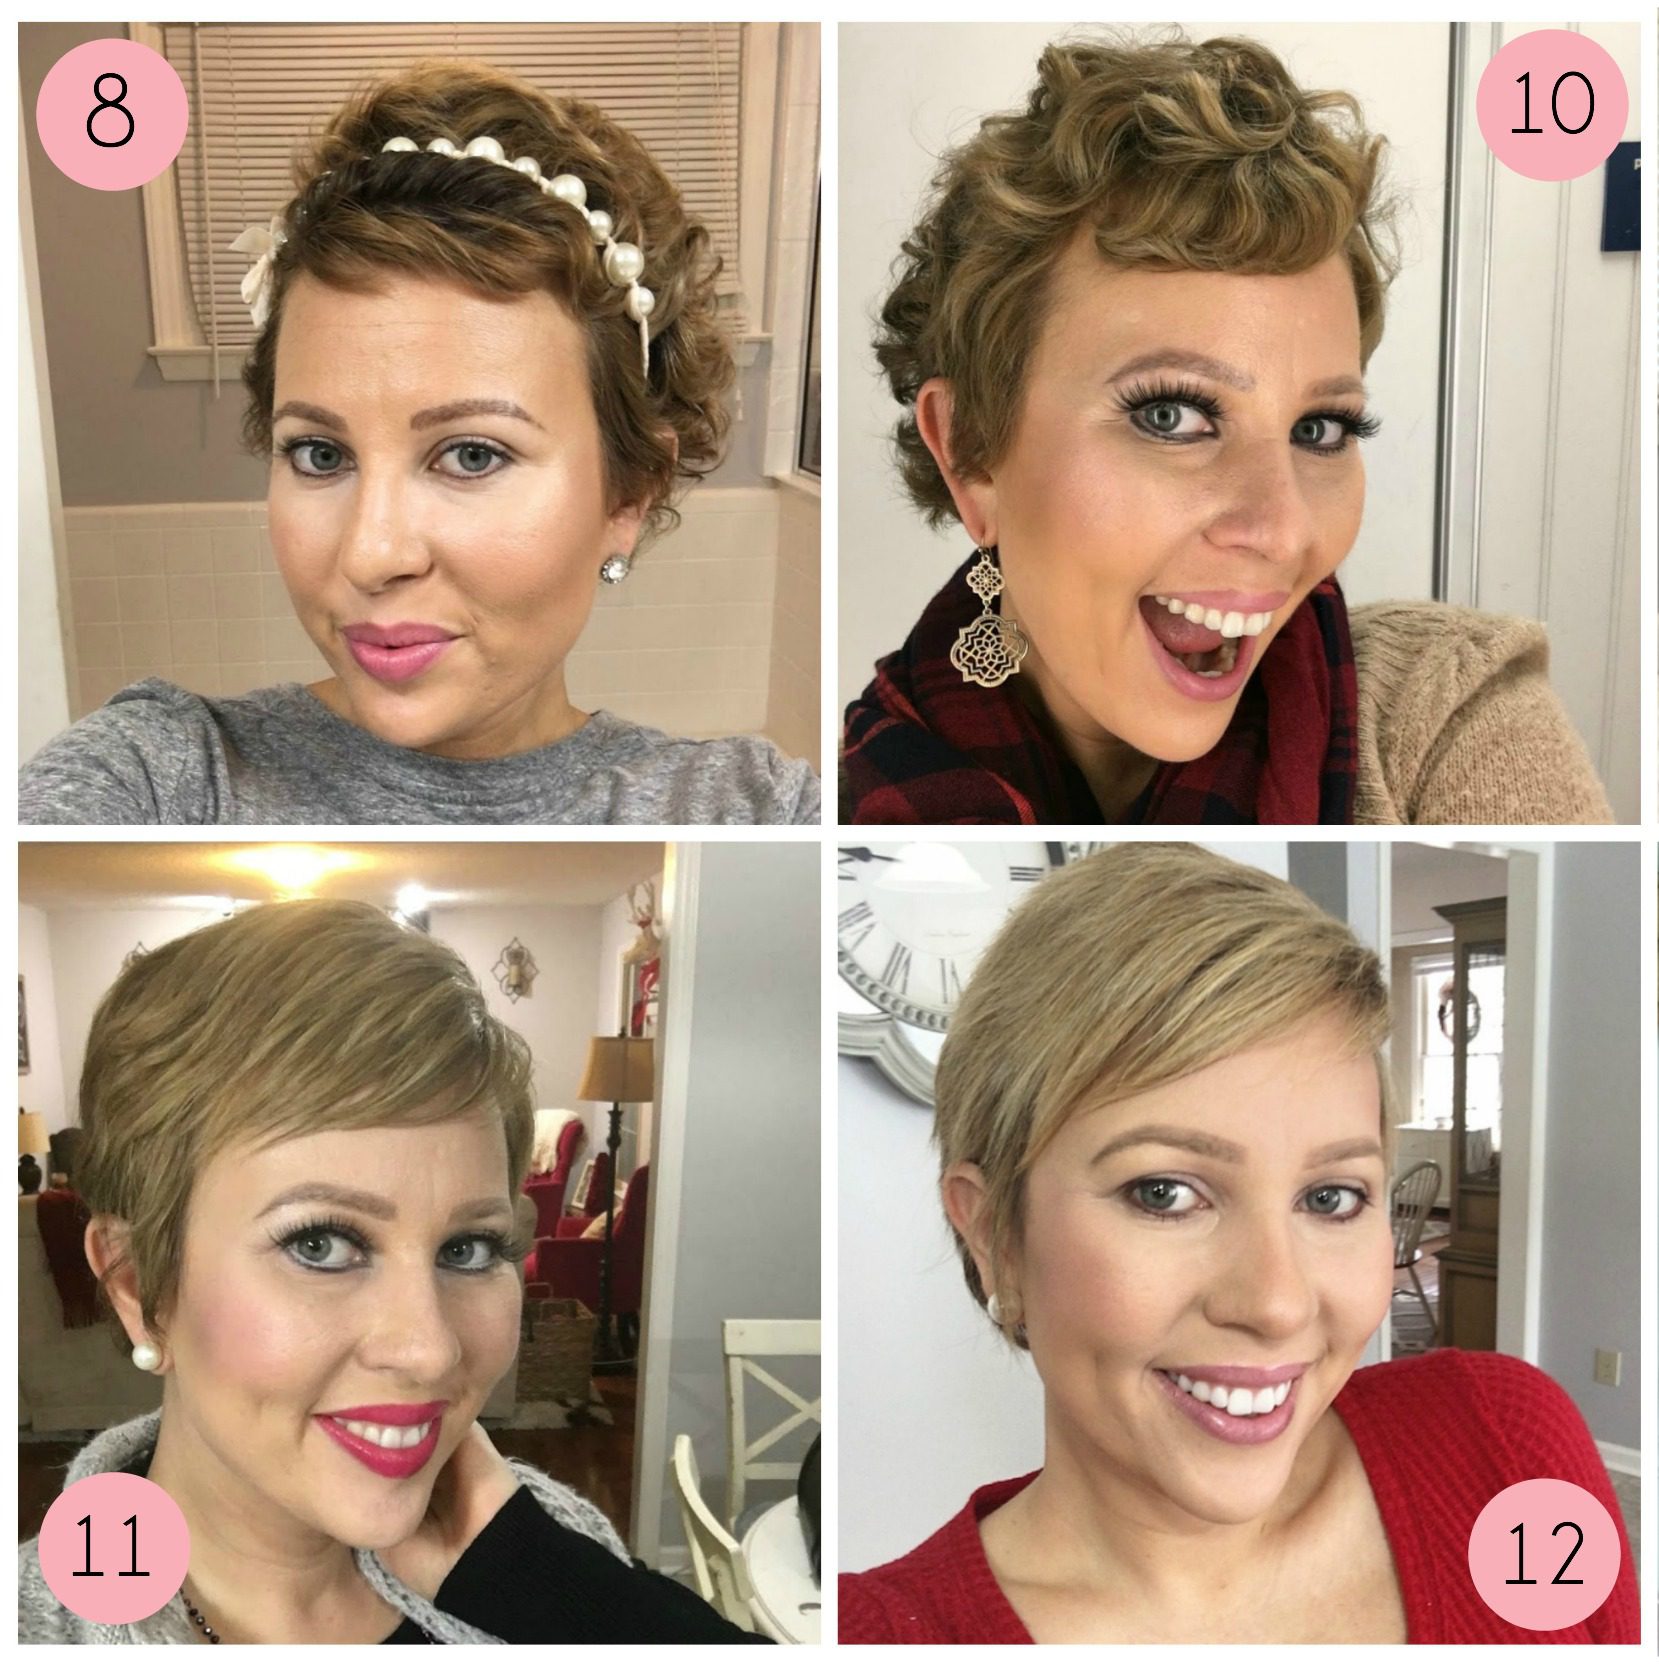 Post-Chemo Growth & Styling Tips